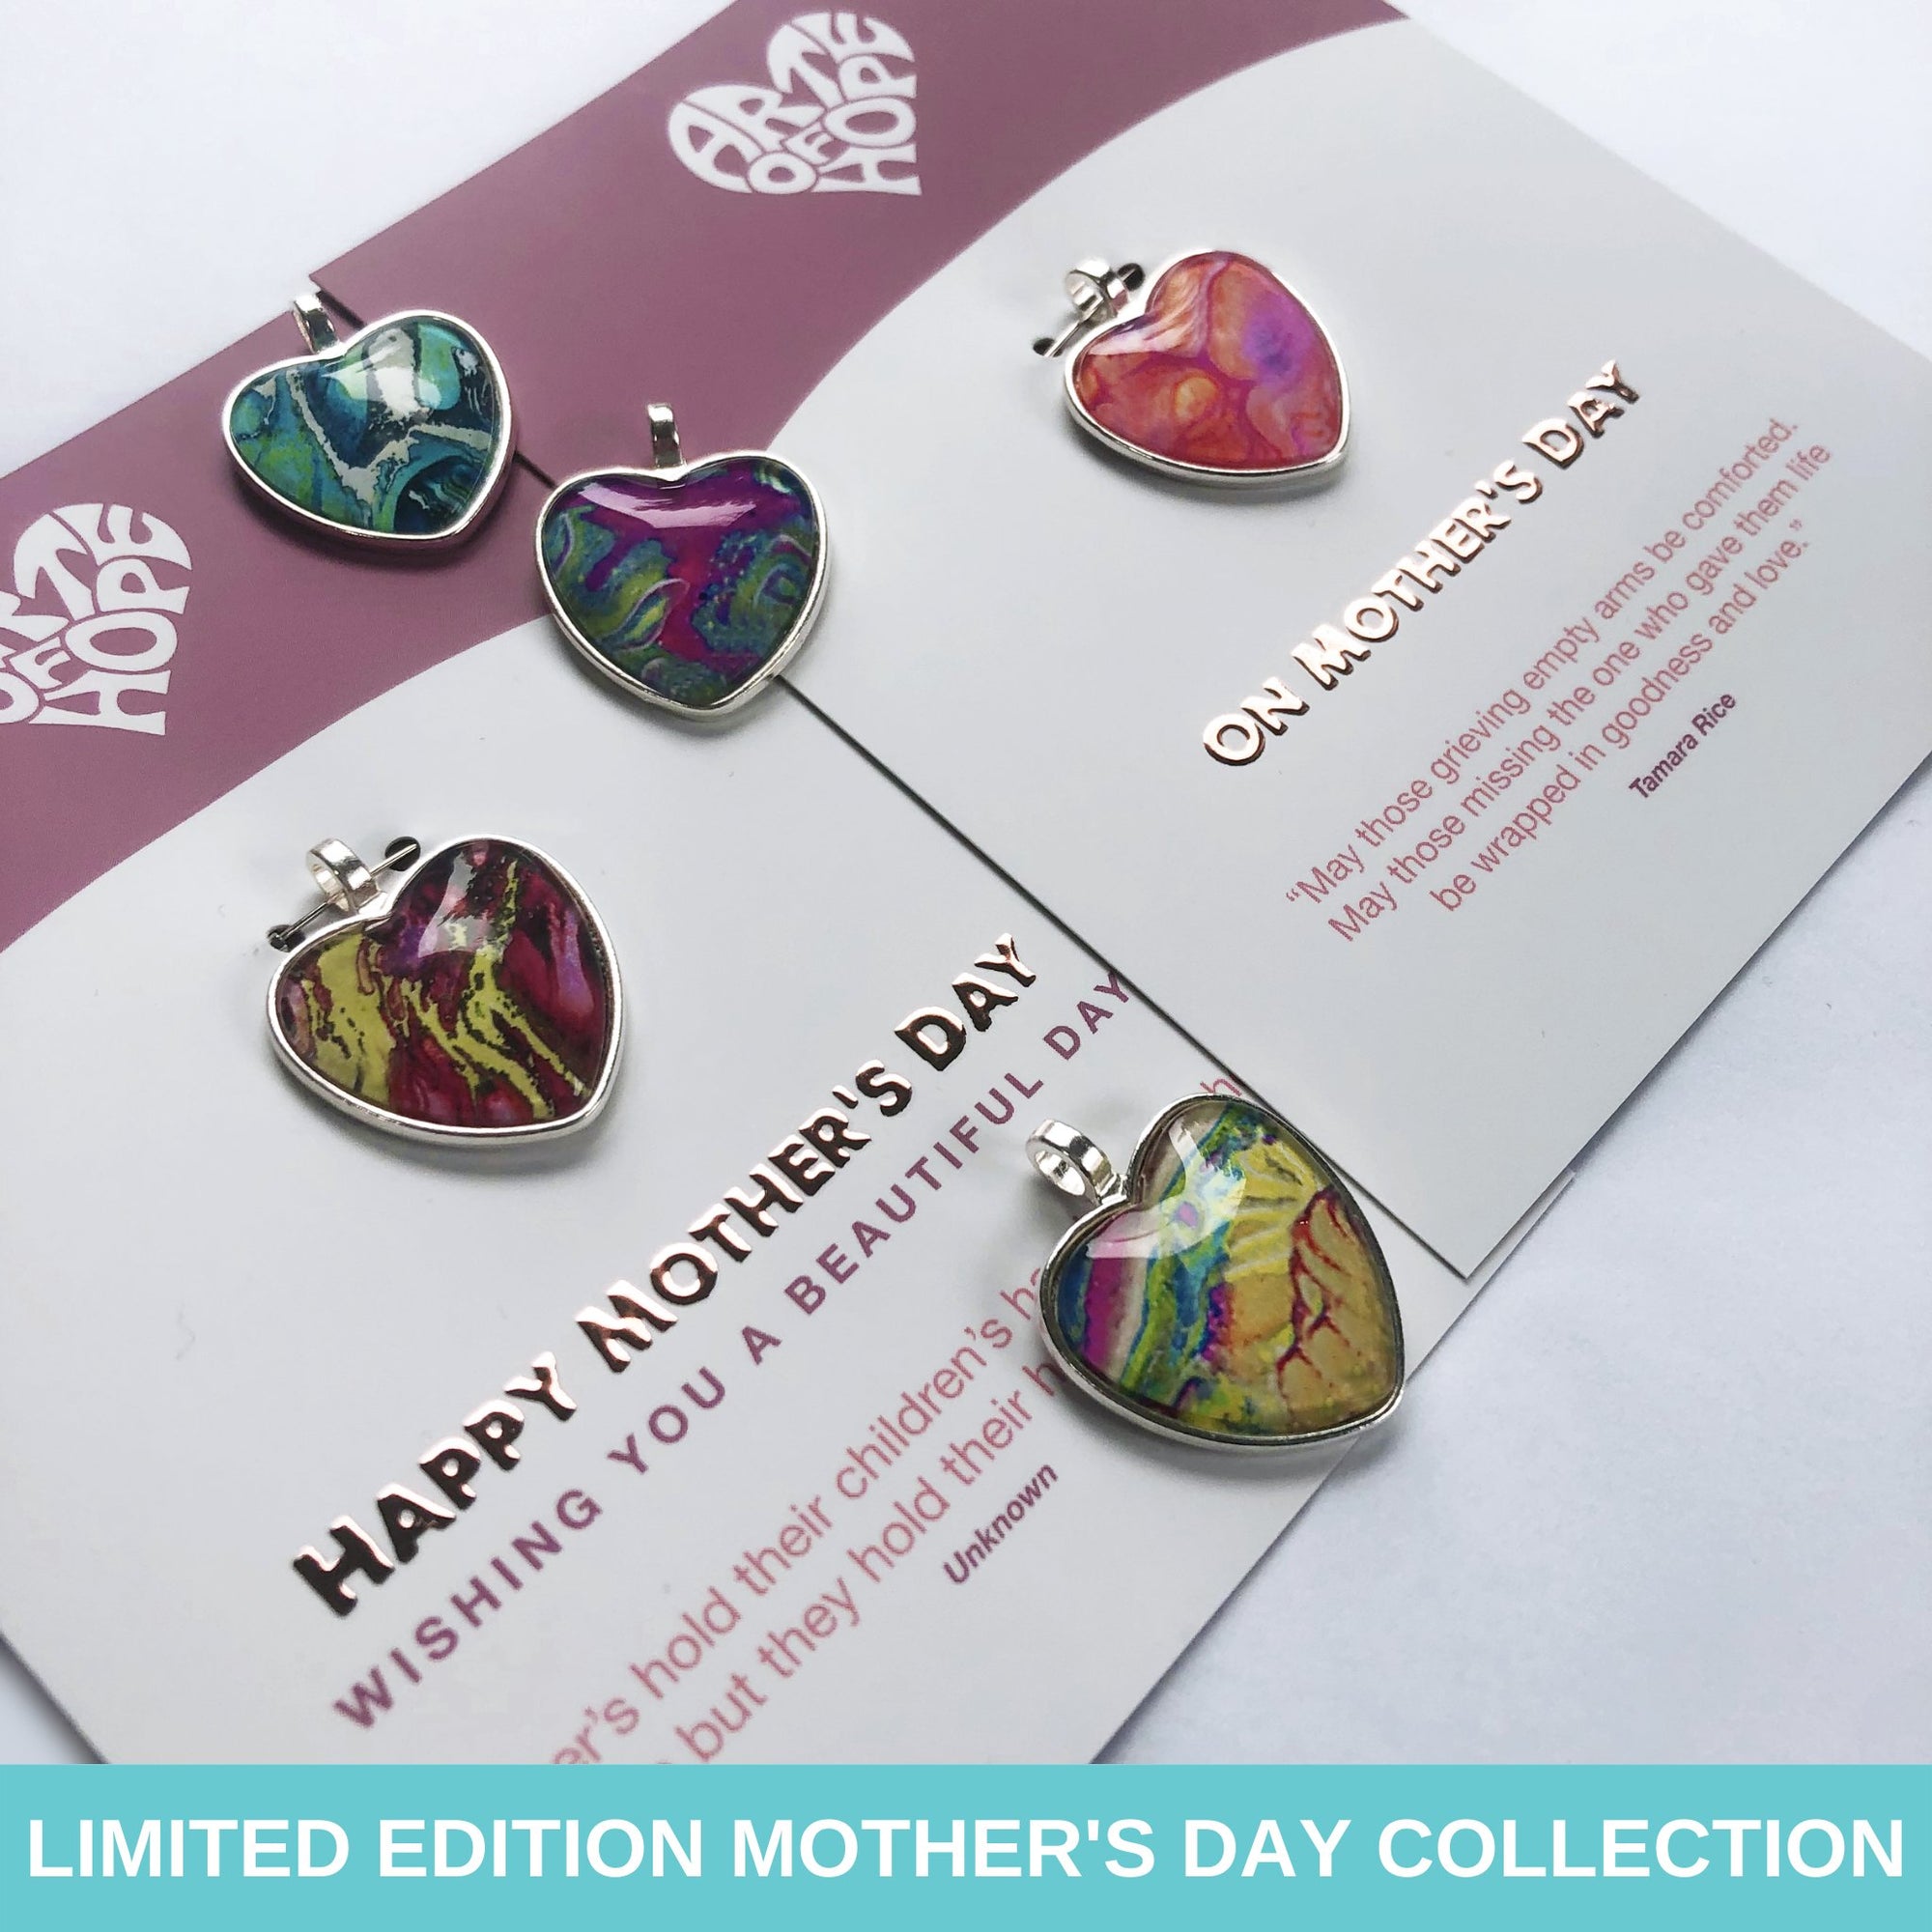 MOTHERS DAY COLLECTION - LIMITED EDITION